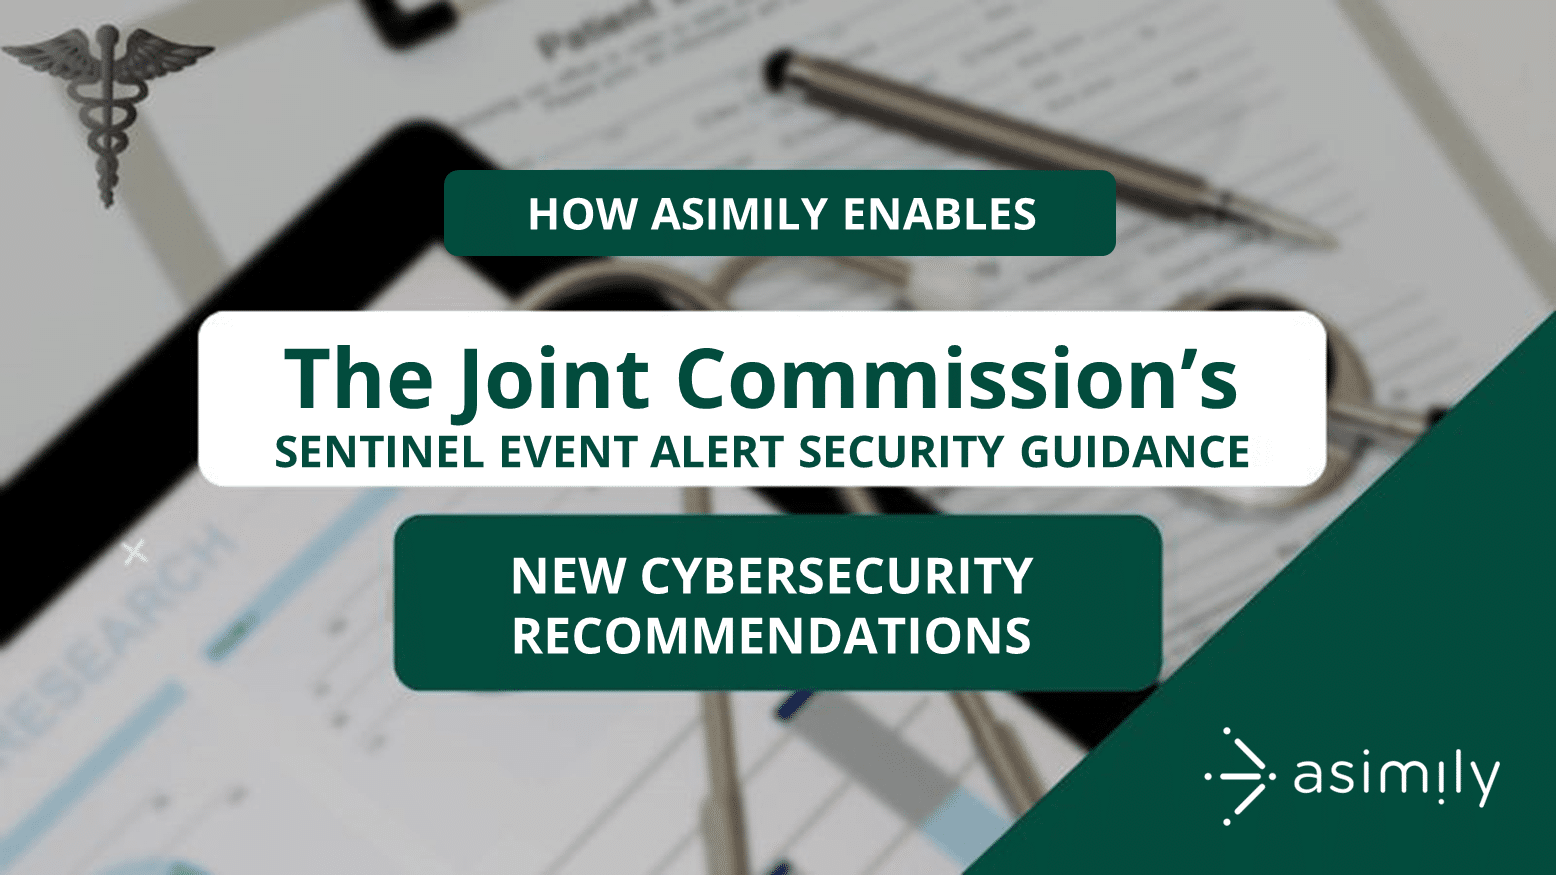 How Asimily Enables the Joint Commission Recommended Action